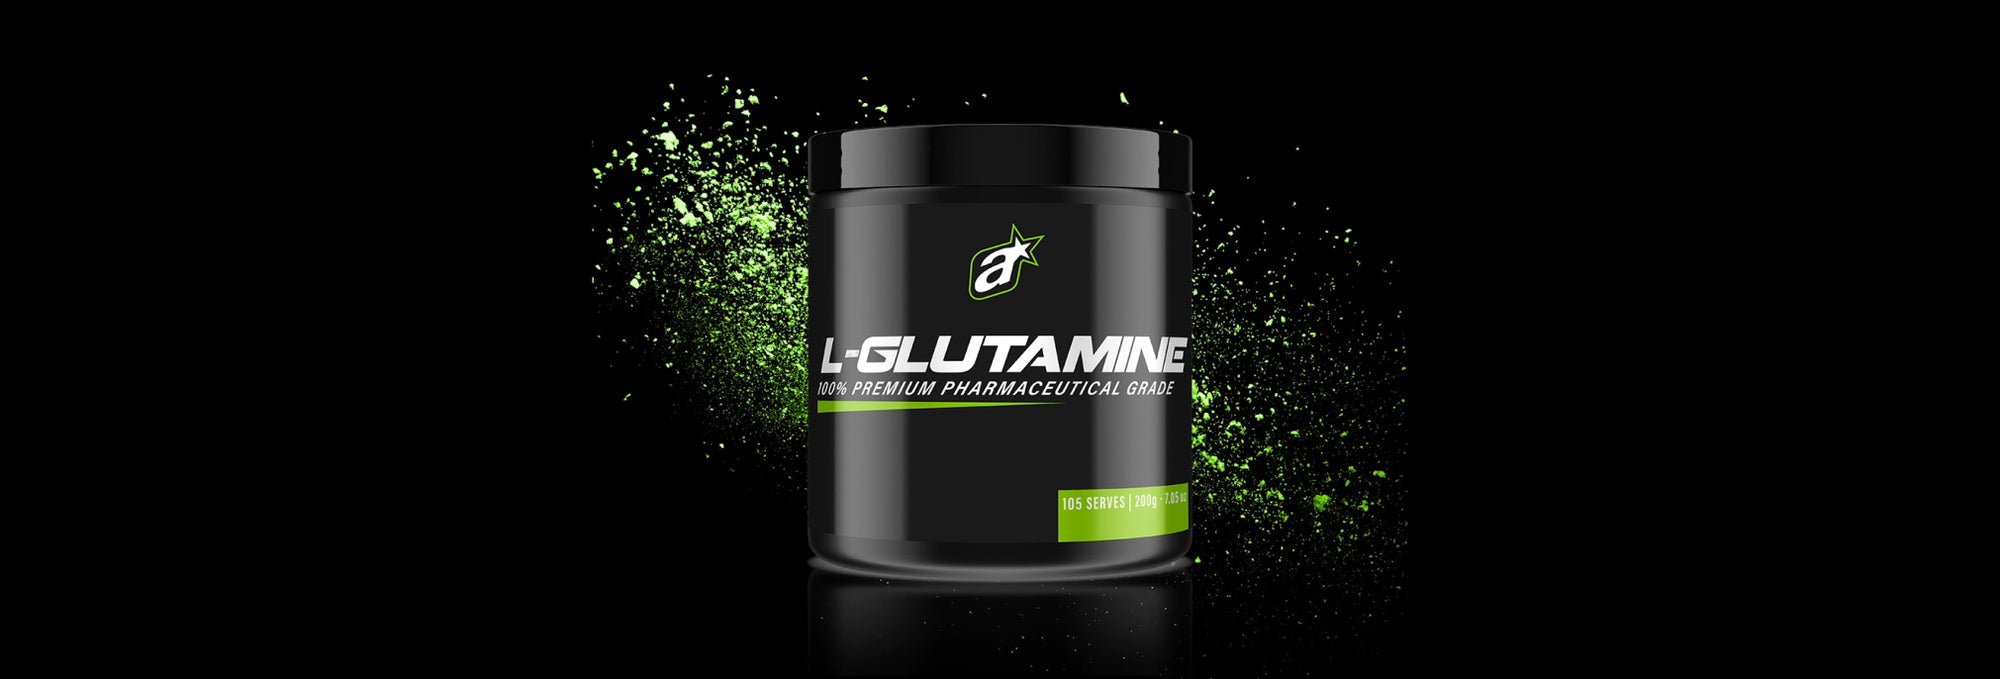 Cracking the Glutamine and Gut Health Code